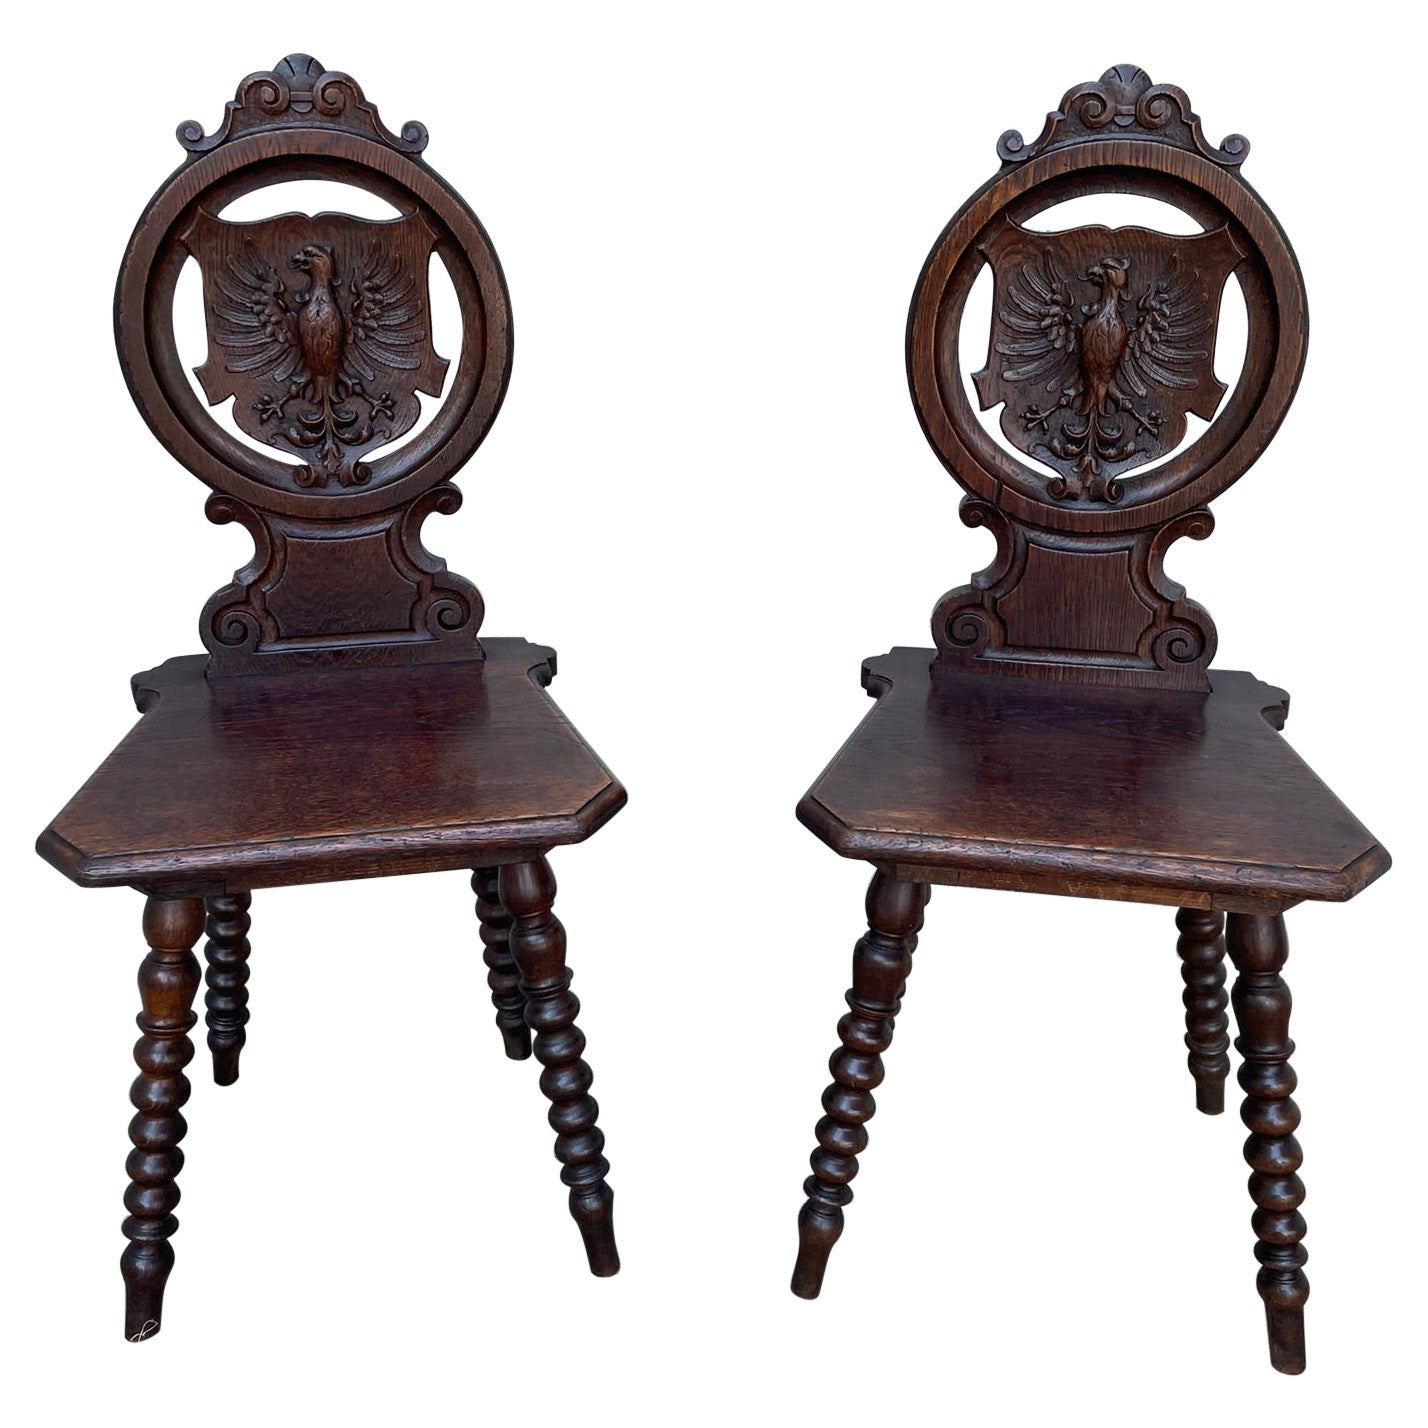 Pair 19th Century Swiss Black Forest Carved Oak Side Chairs